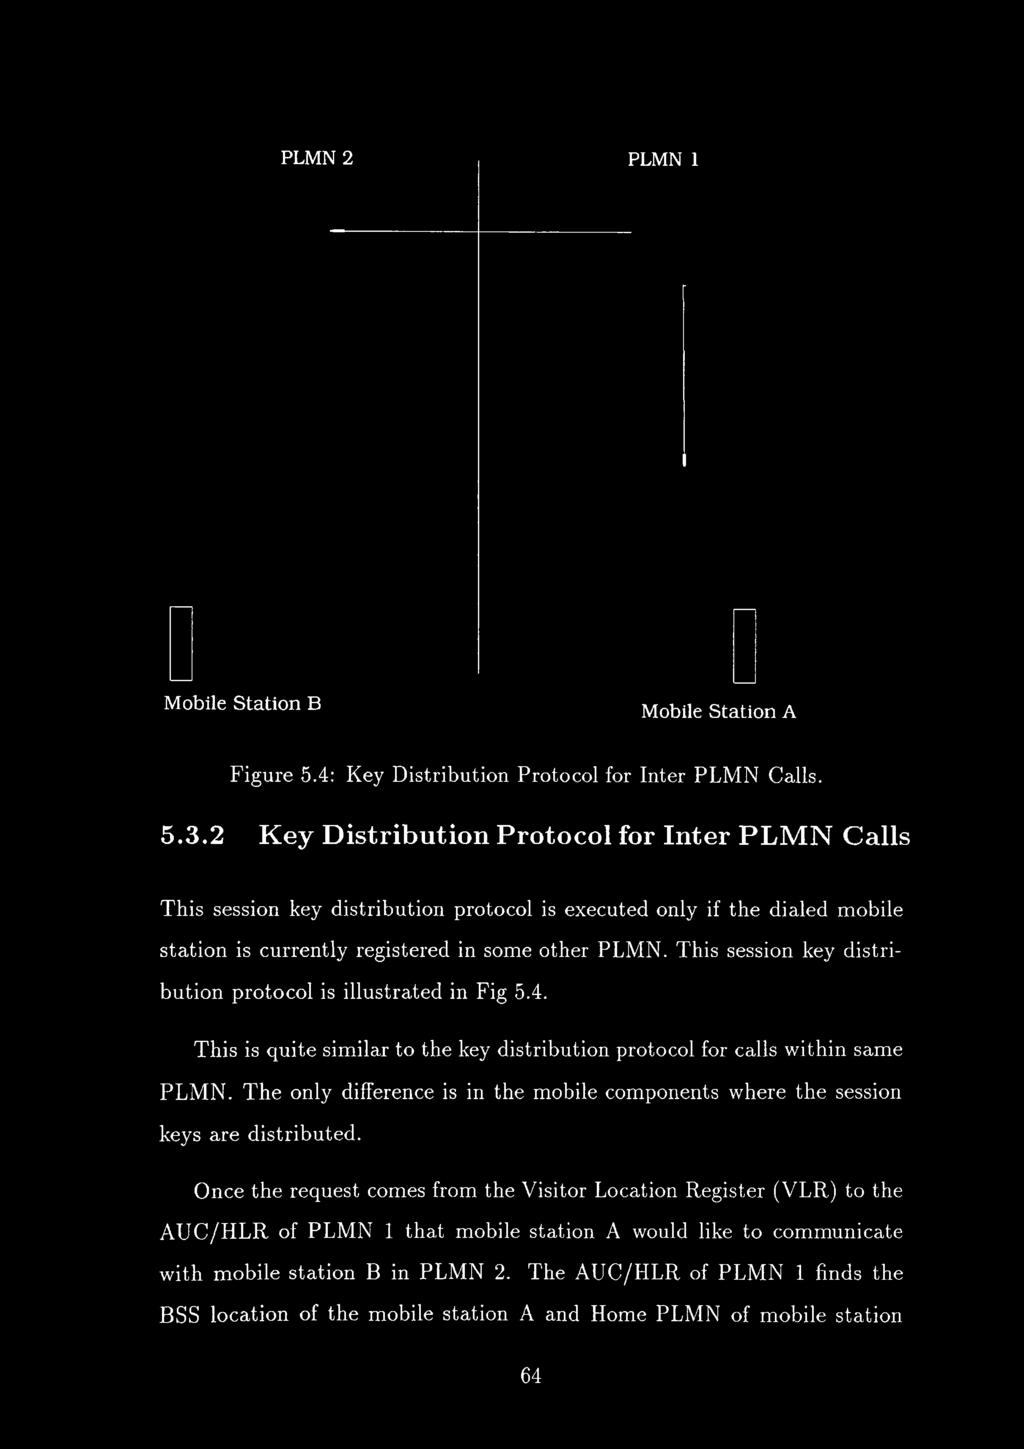 This session key distribution protocol is illustrated in Fig 5.4. This is quite similar to the key distribution protocol for calls within same PLMN.